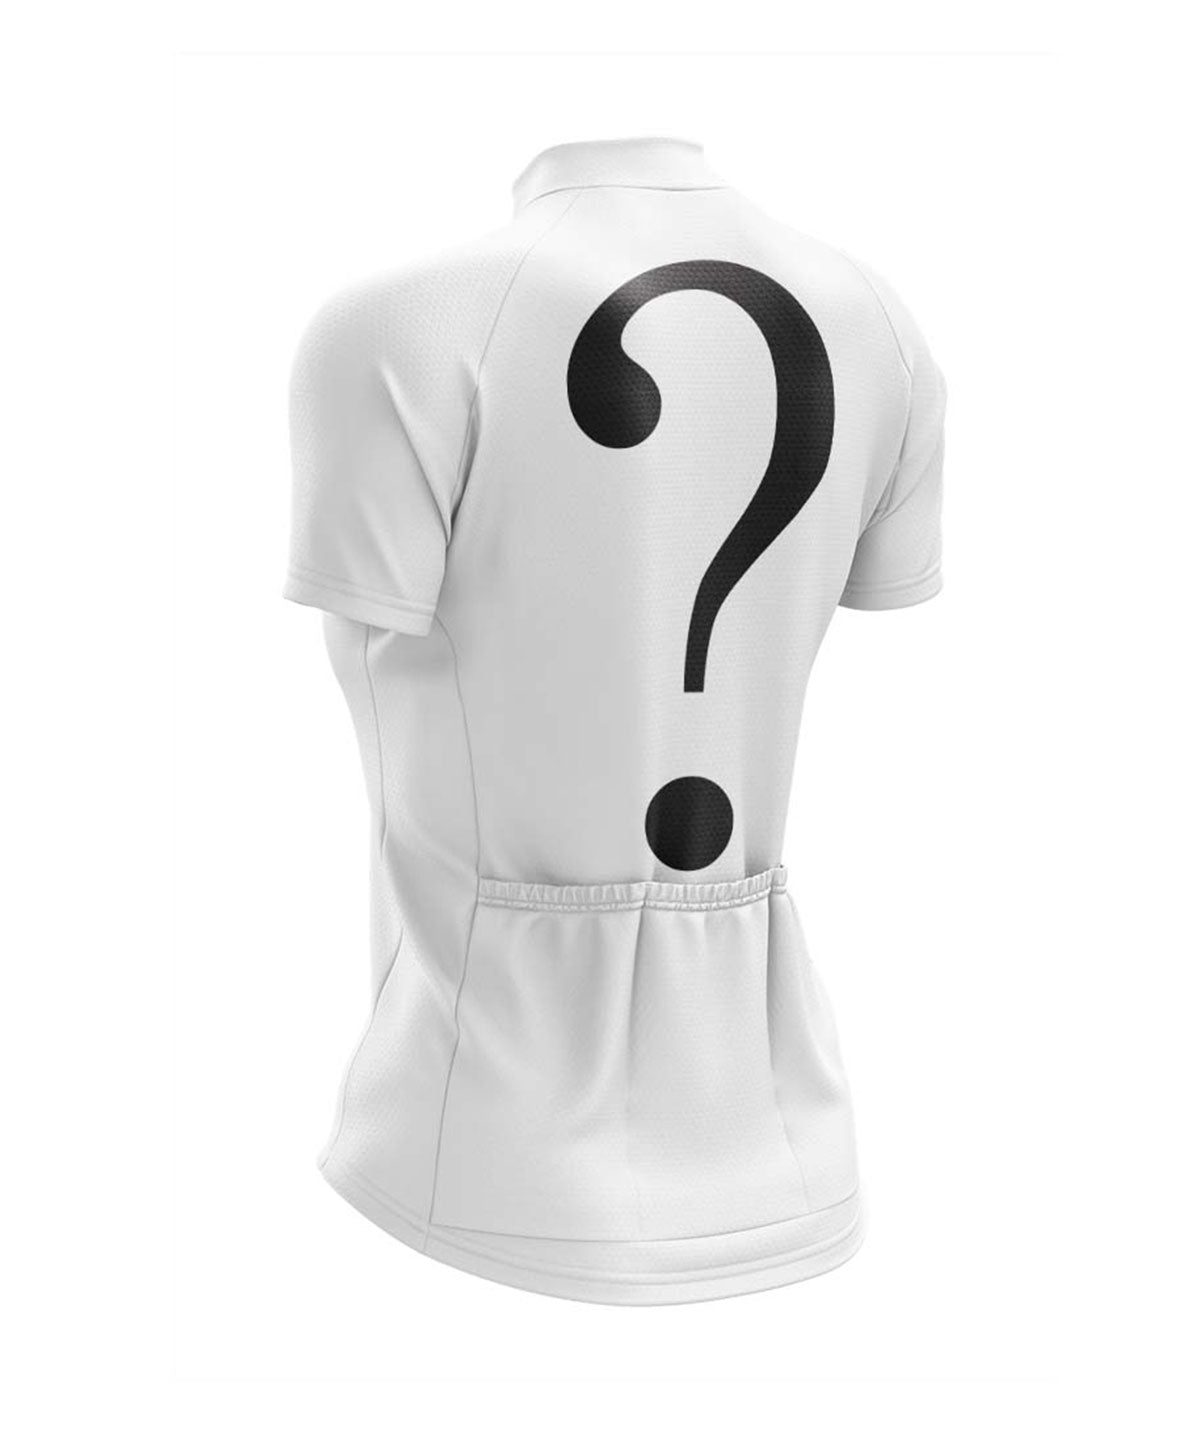 W'S CLUB FIT JERSEY - MYSTERY DESIGN